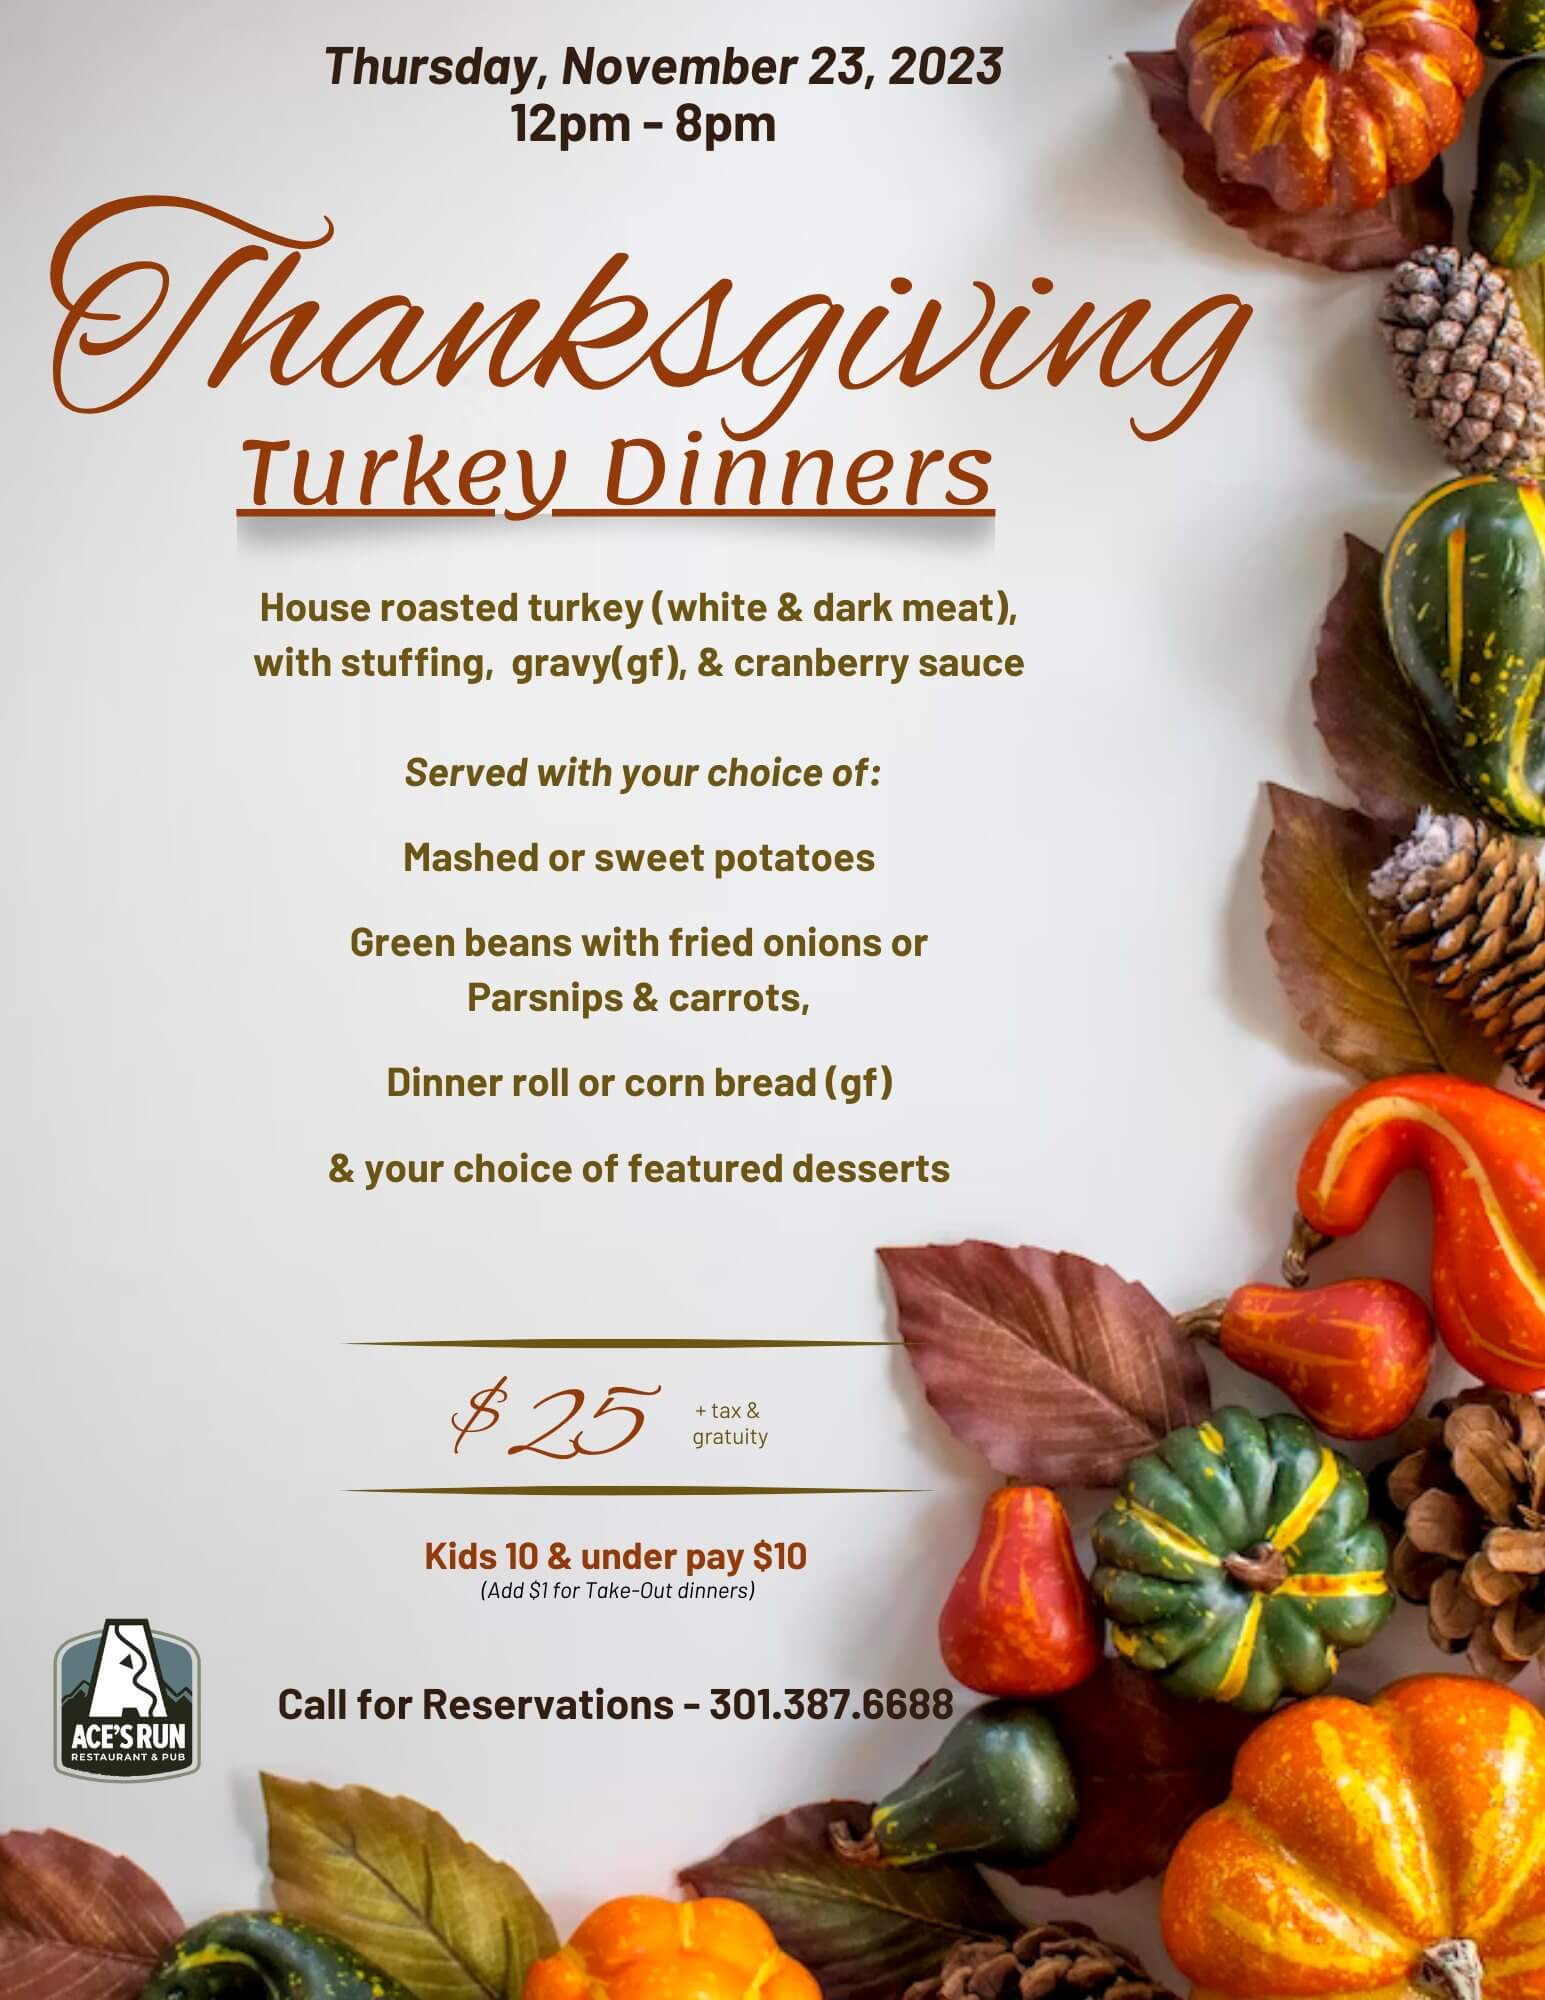 Ace's Run Restaurant and Pub: Thanksgiving Turkey Dinners at Deep Creek Lake, MD